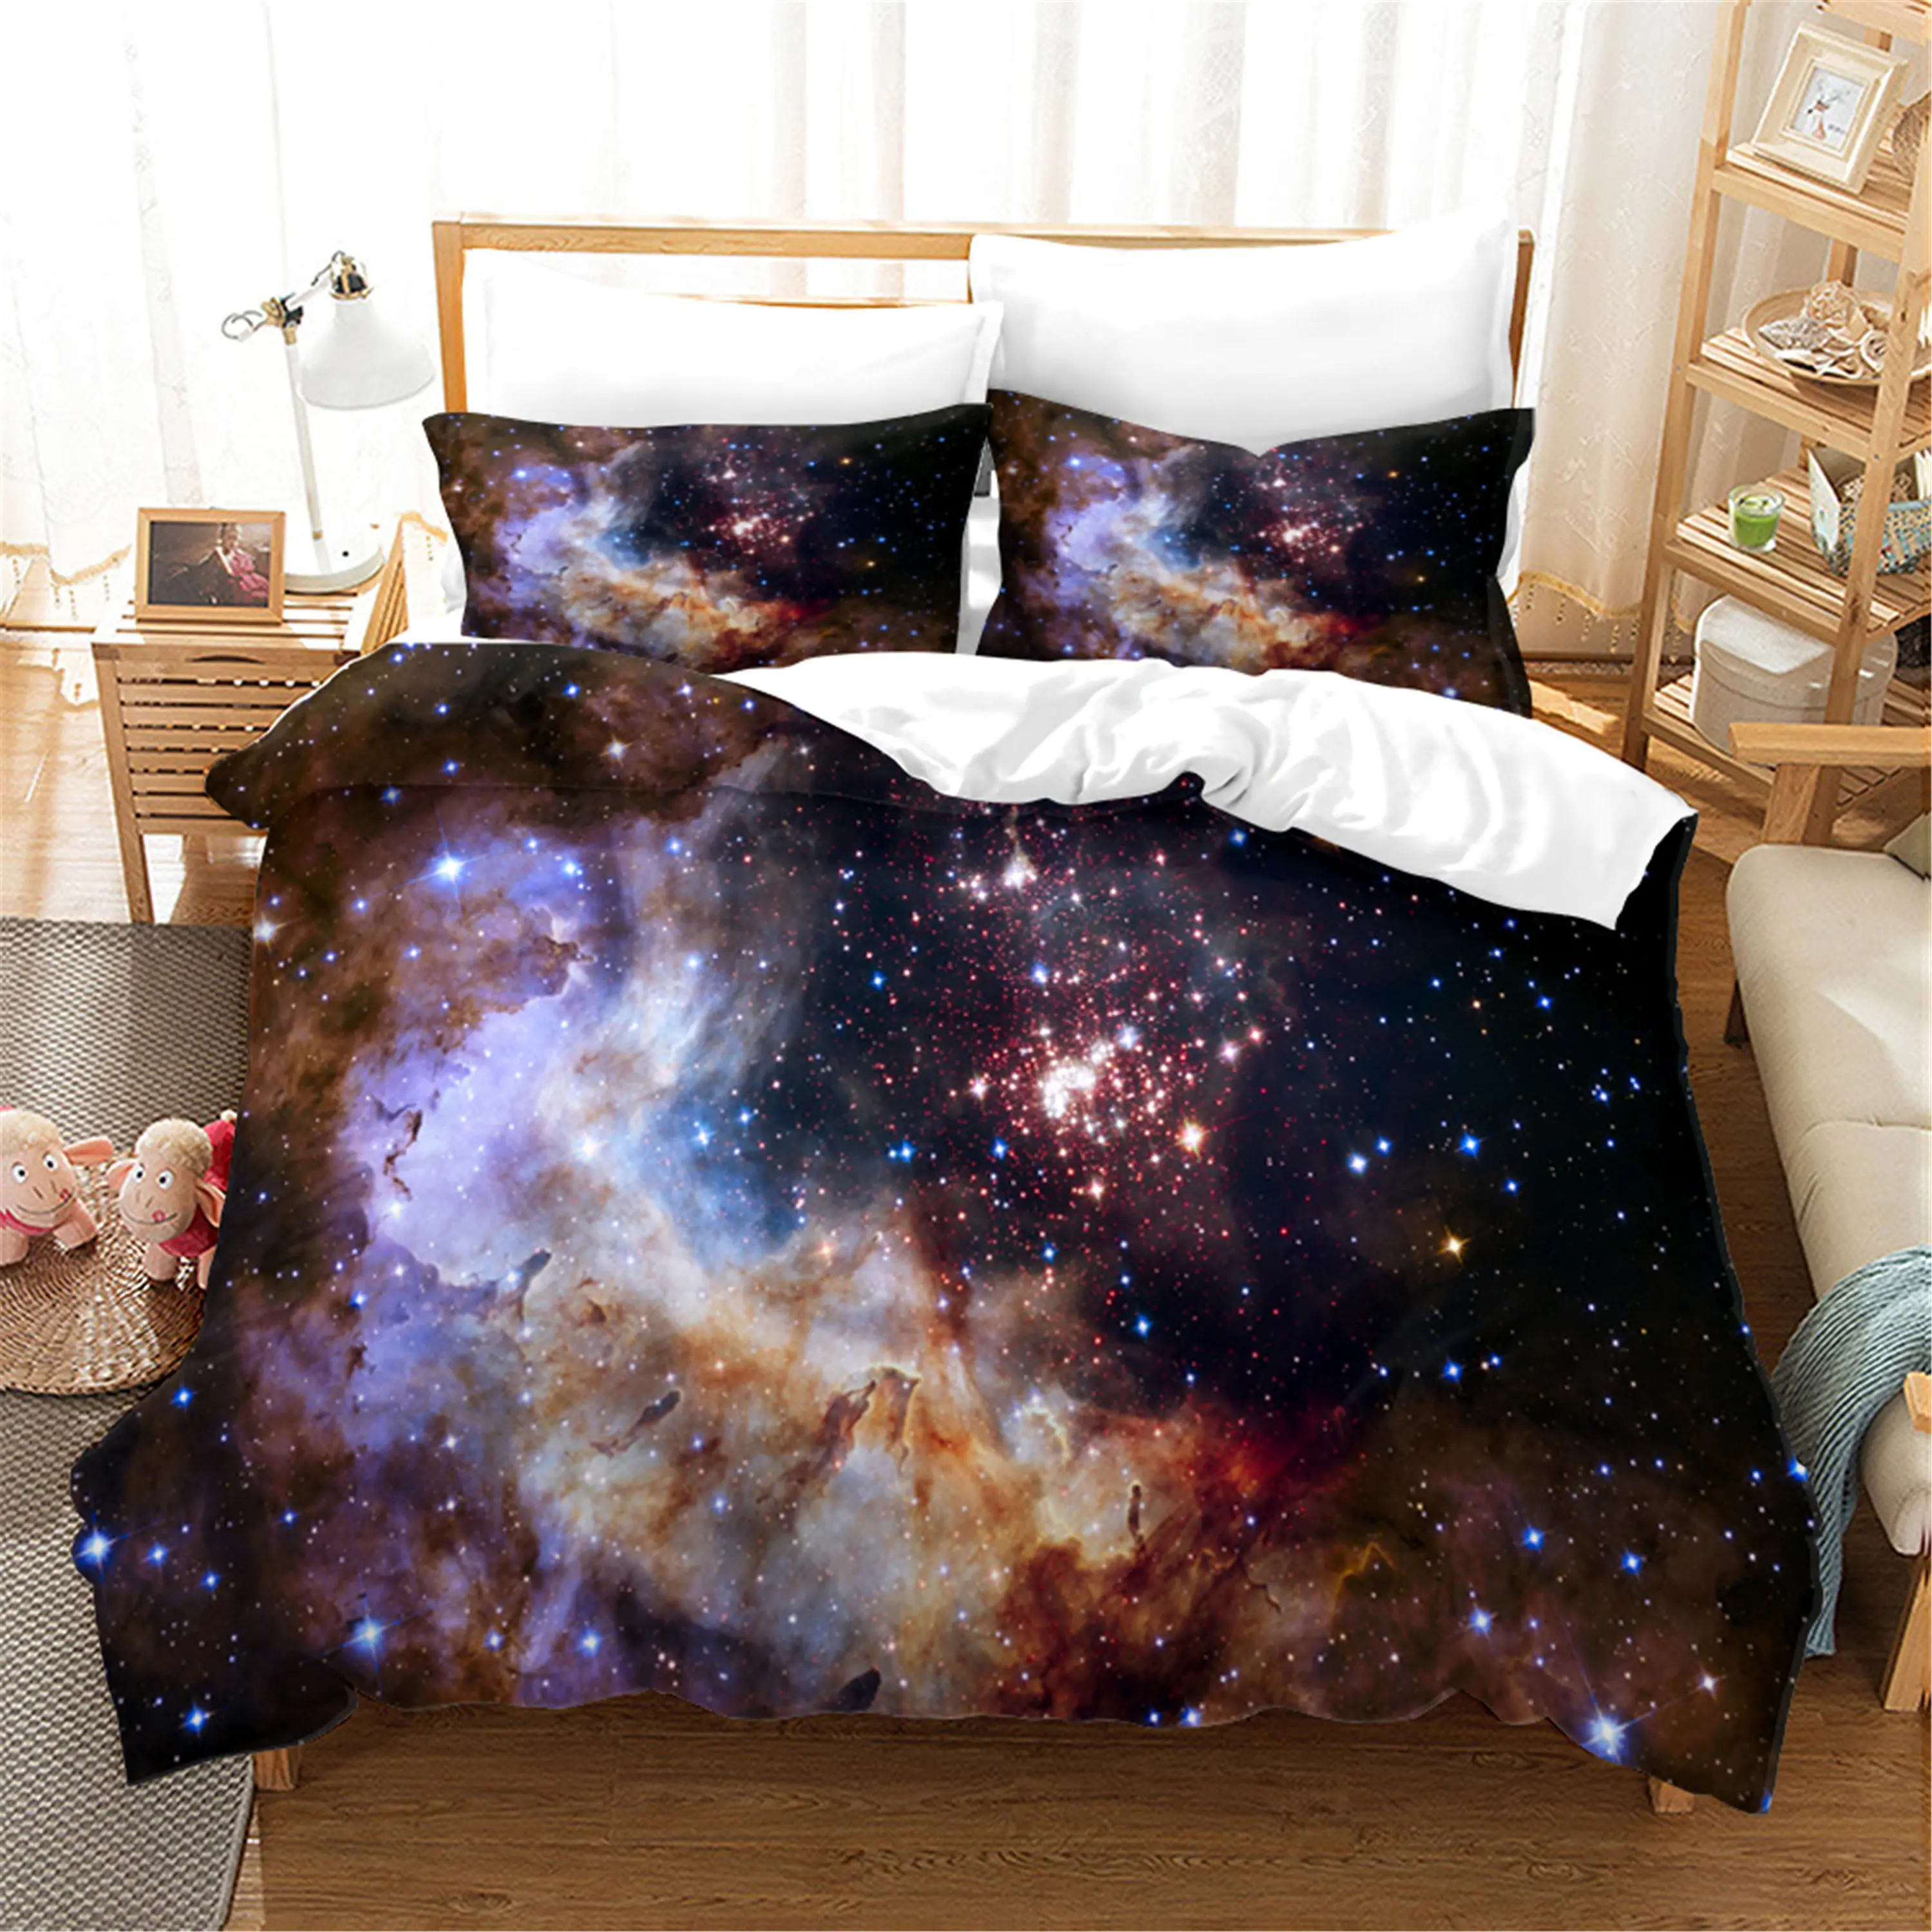 

Blue Starry Sky Bedding Sets Dreamy Quilt Covers Bedclothes King Queen Home Textile Bed Linens And Pillowcase Luxury Duvet Cover